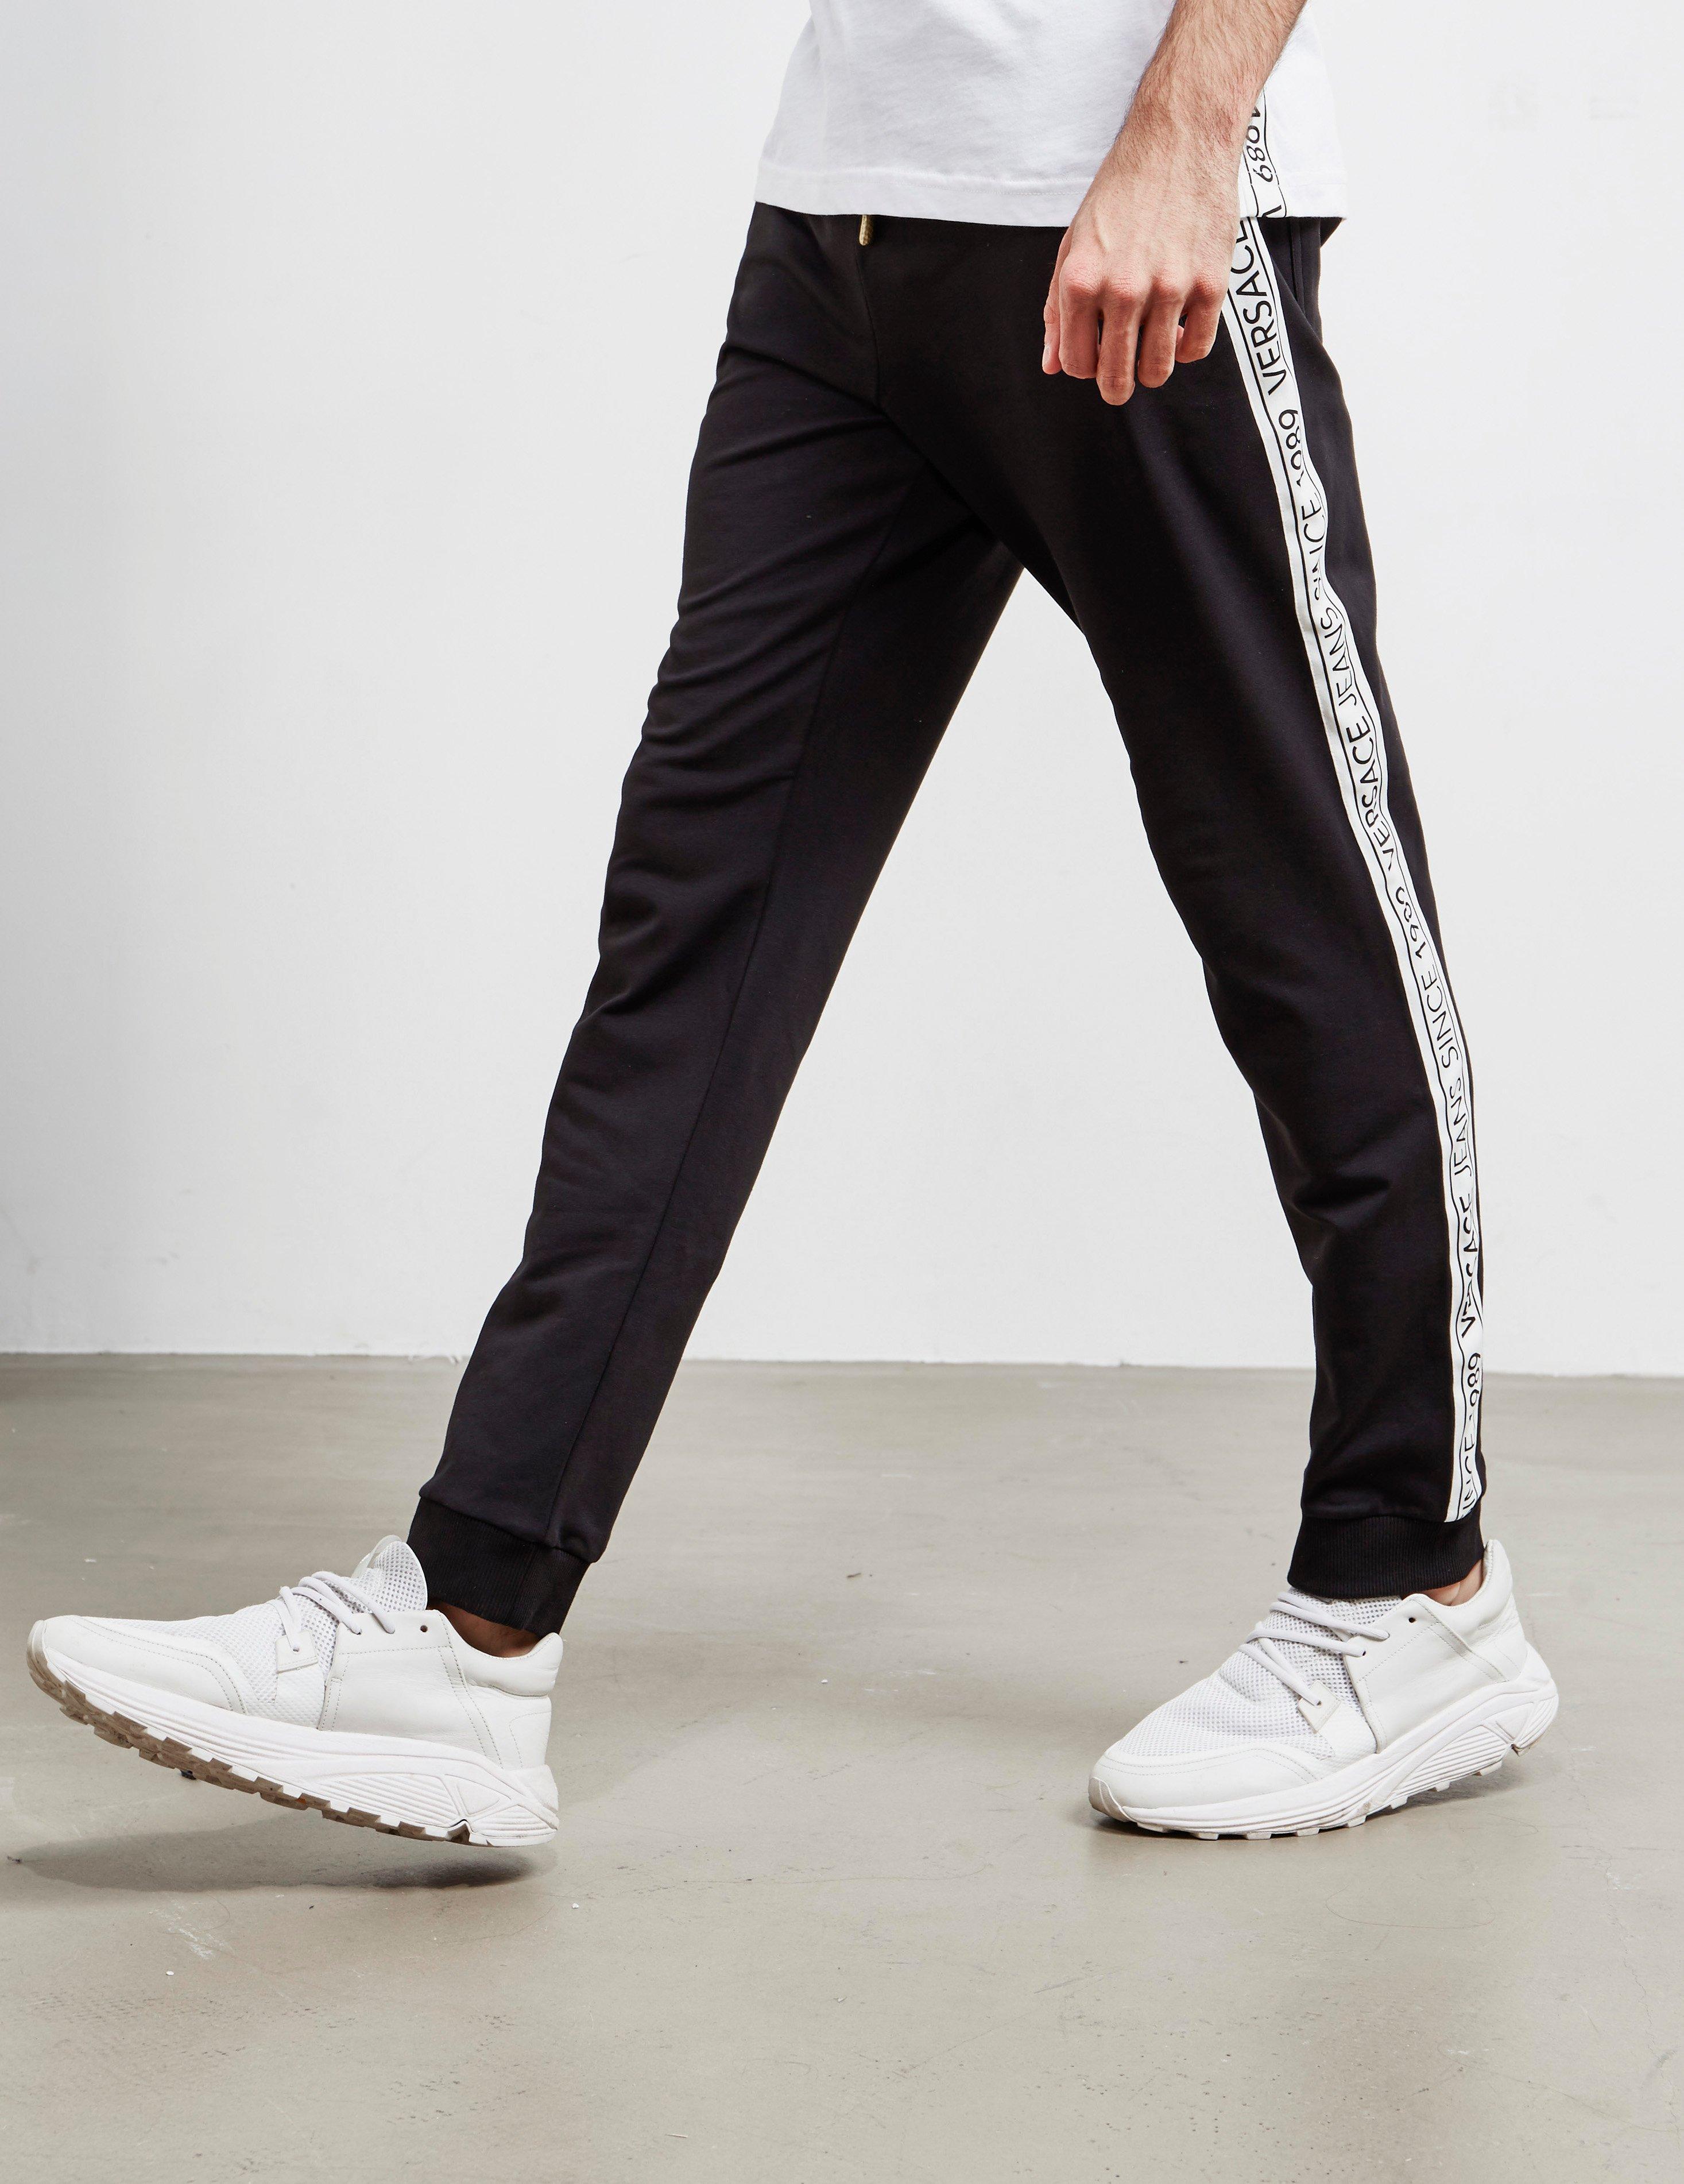 Versace Jeans Tape Cuffed Track Pants Black in Black - Lyst